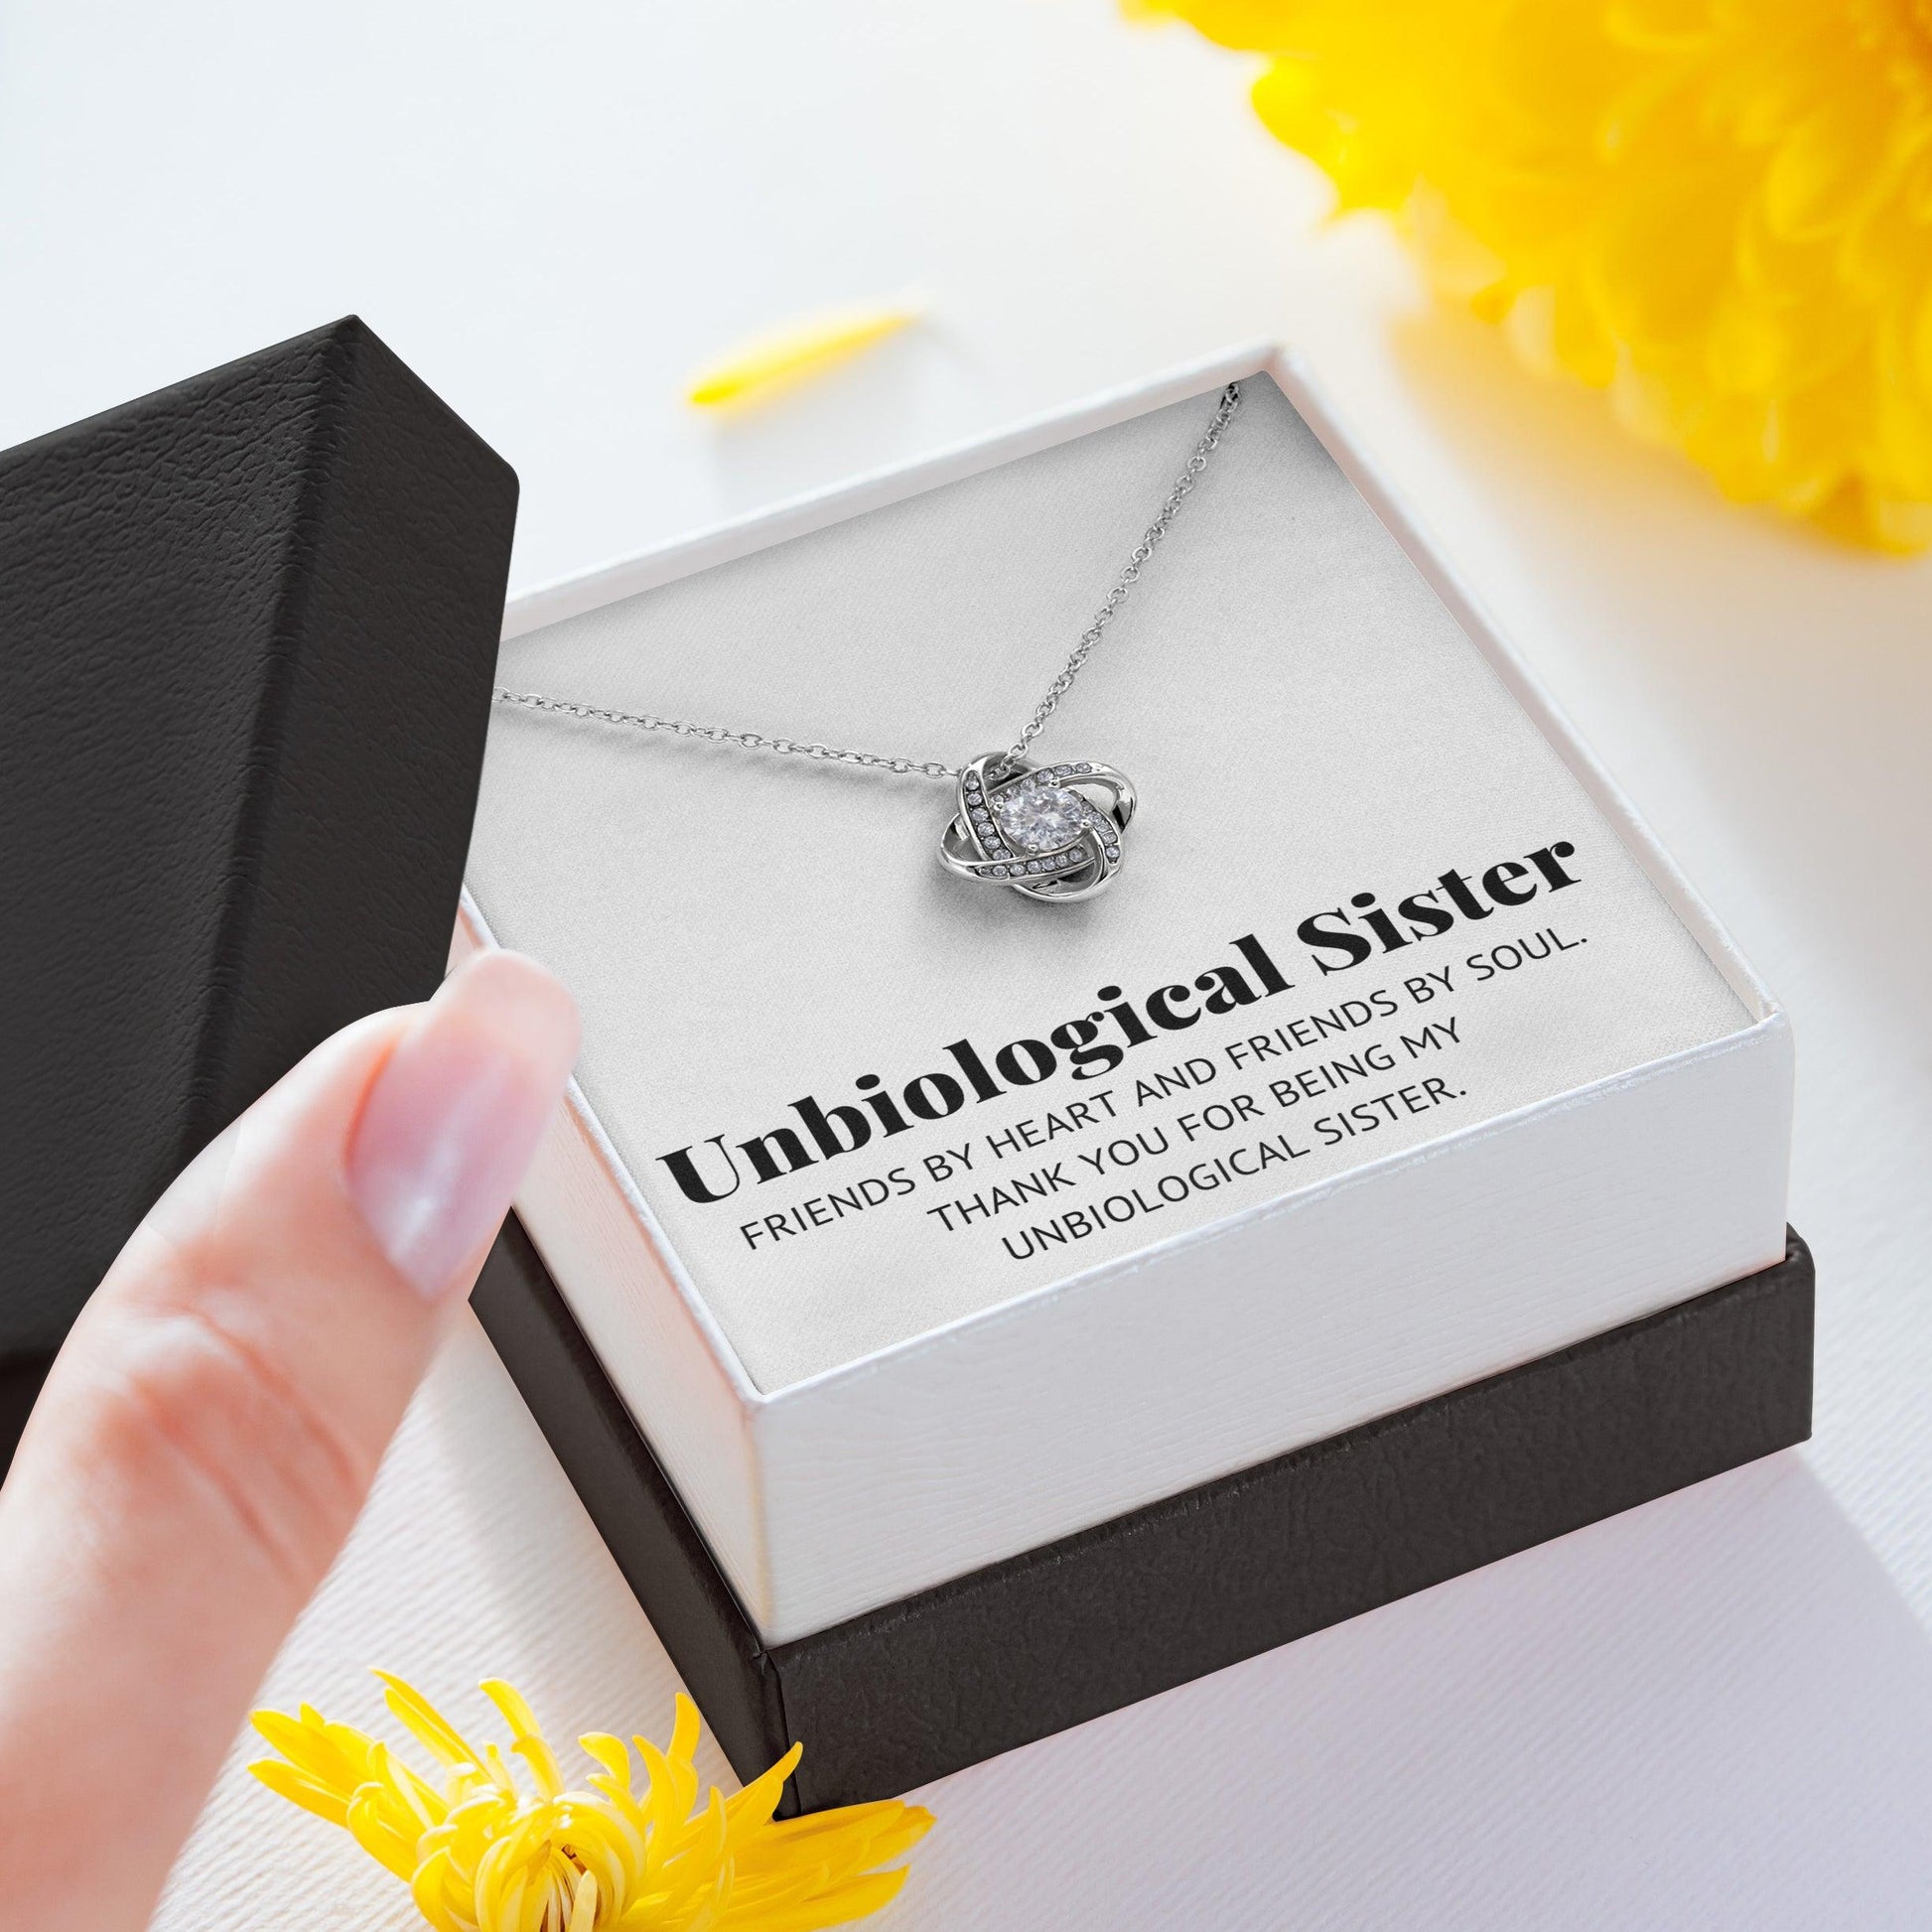 Jewelry gifts Unbiological Sister - Biggest Support - Necklace - Belesmé - Memorable Jewelry Gifts